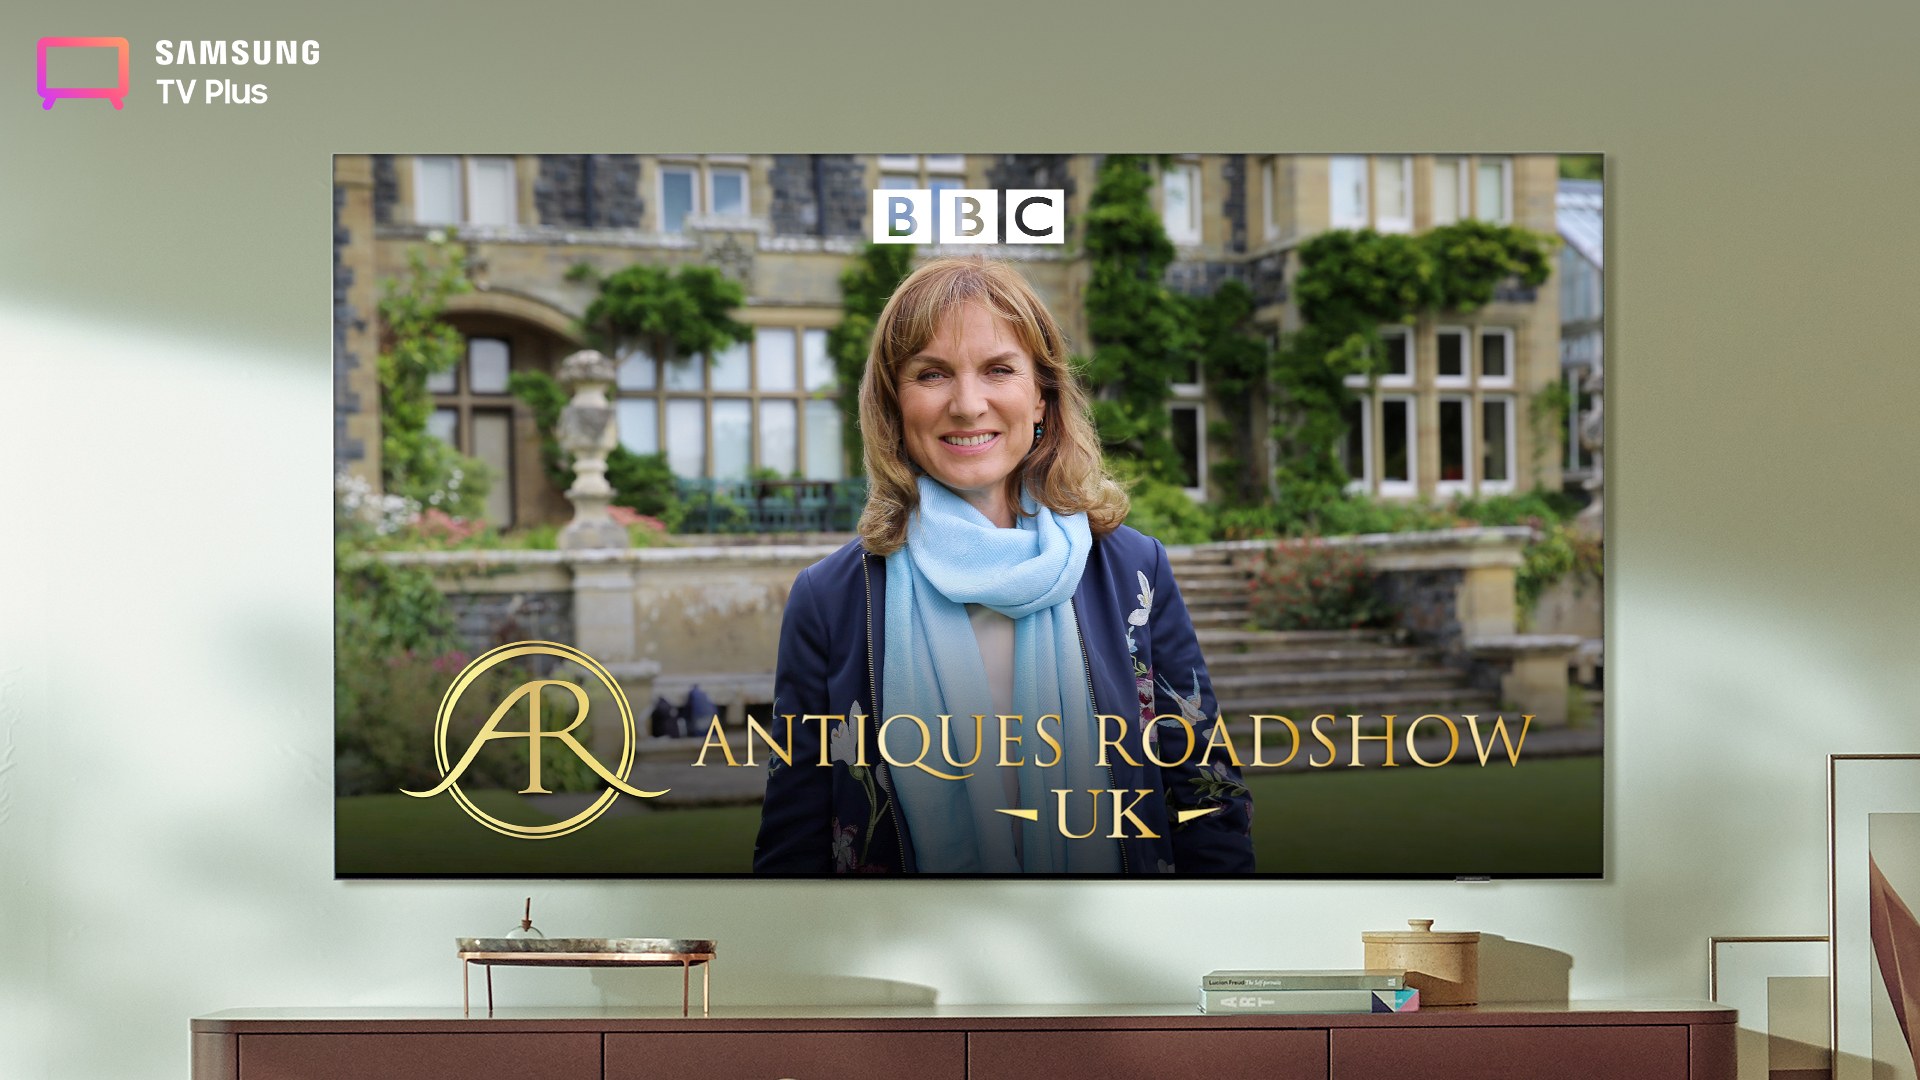 BBC’s Antiques Roadshow UK Channel Launches for Free on Samsung TV Plus